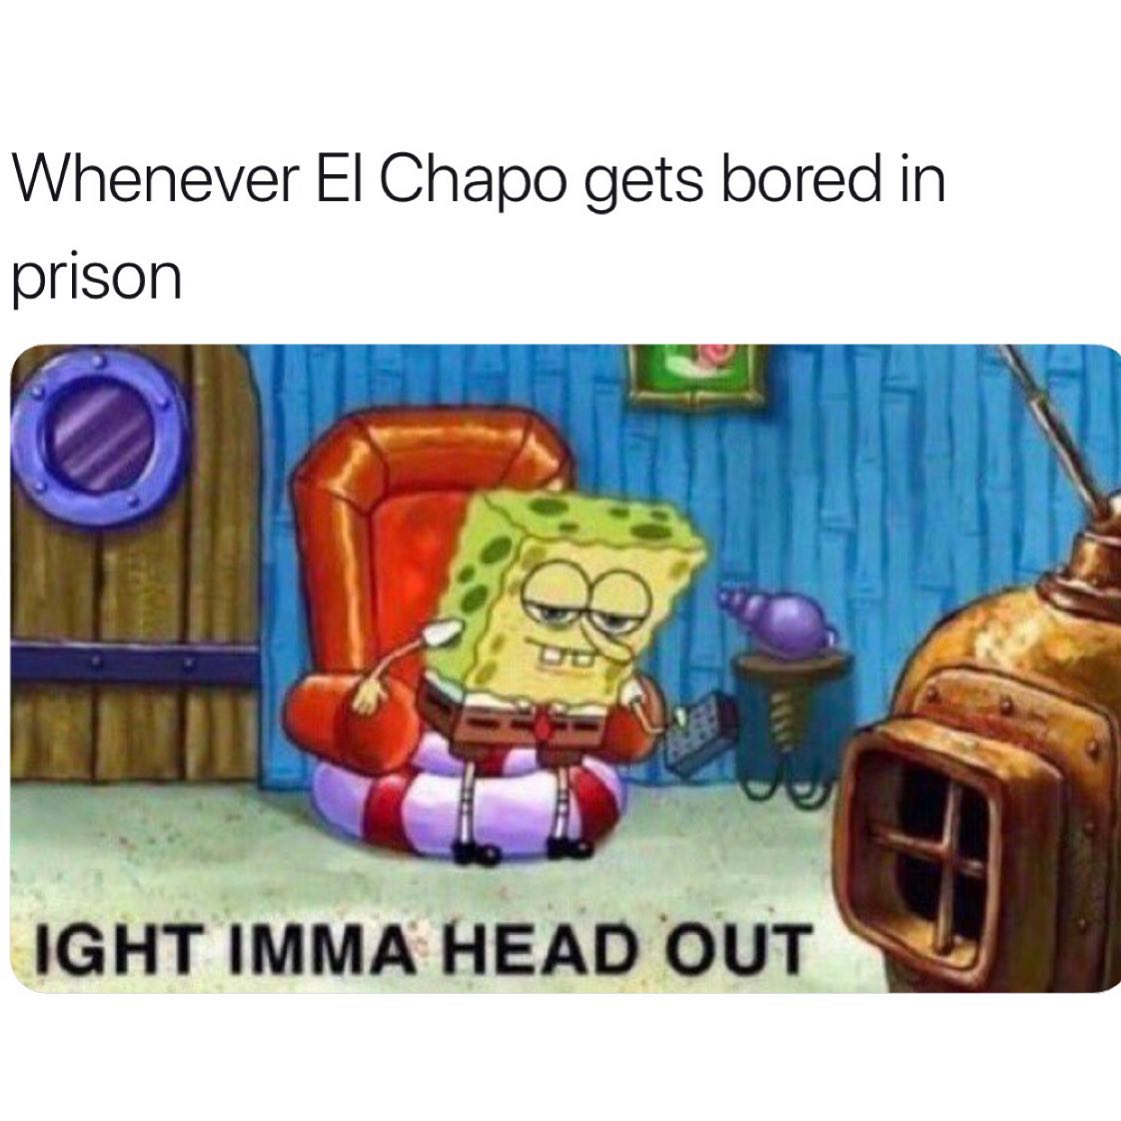 ight ima head out - reddit aight imma head out meme - Whenever El Chapo gets bored in prison Ight Imma Head Out